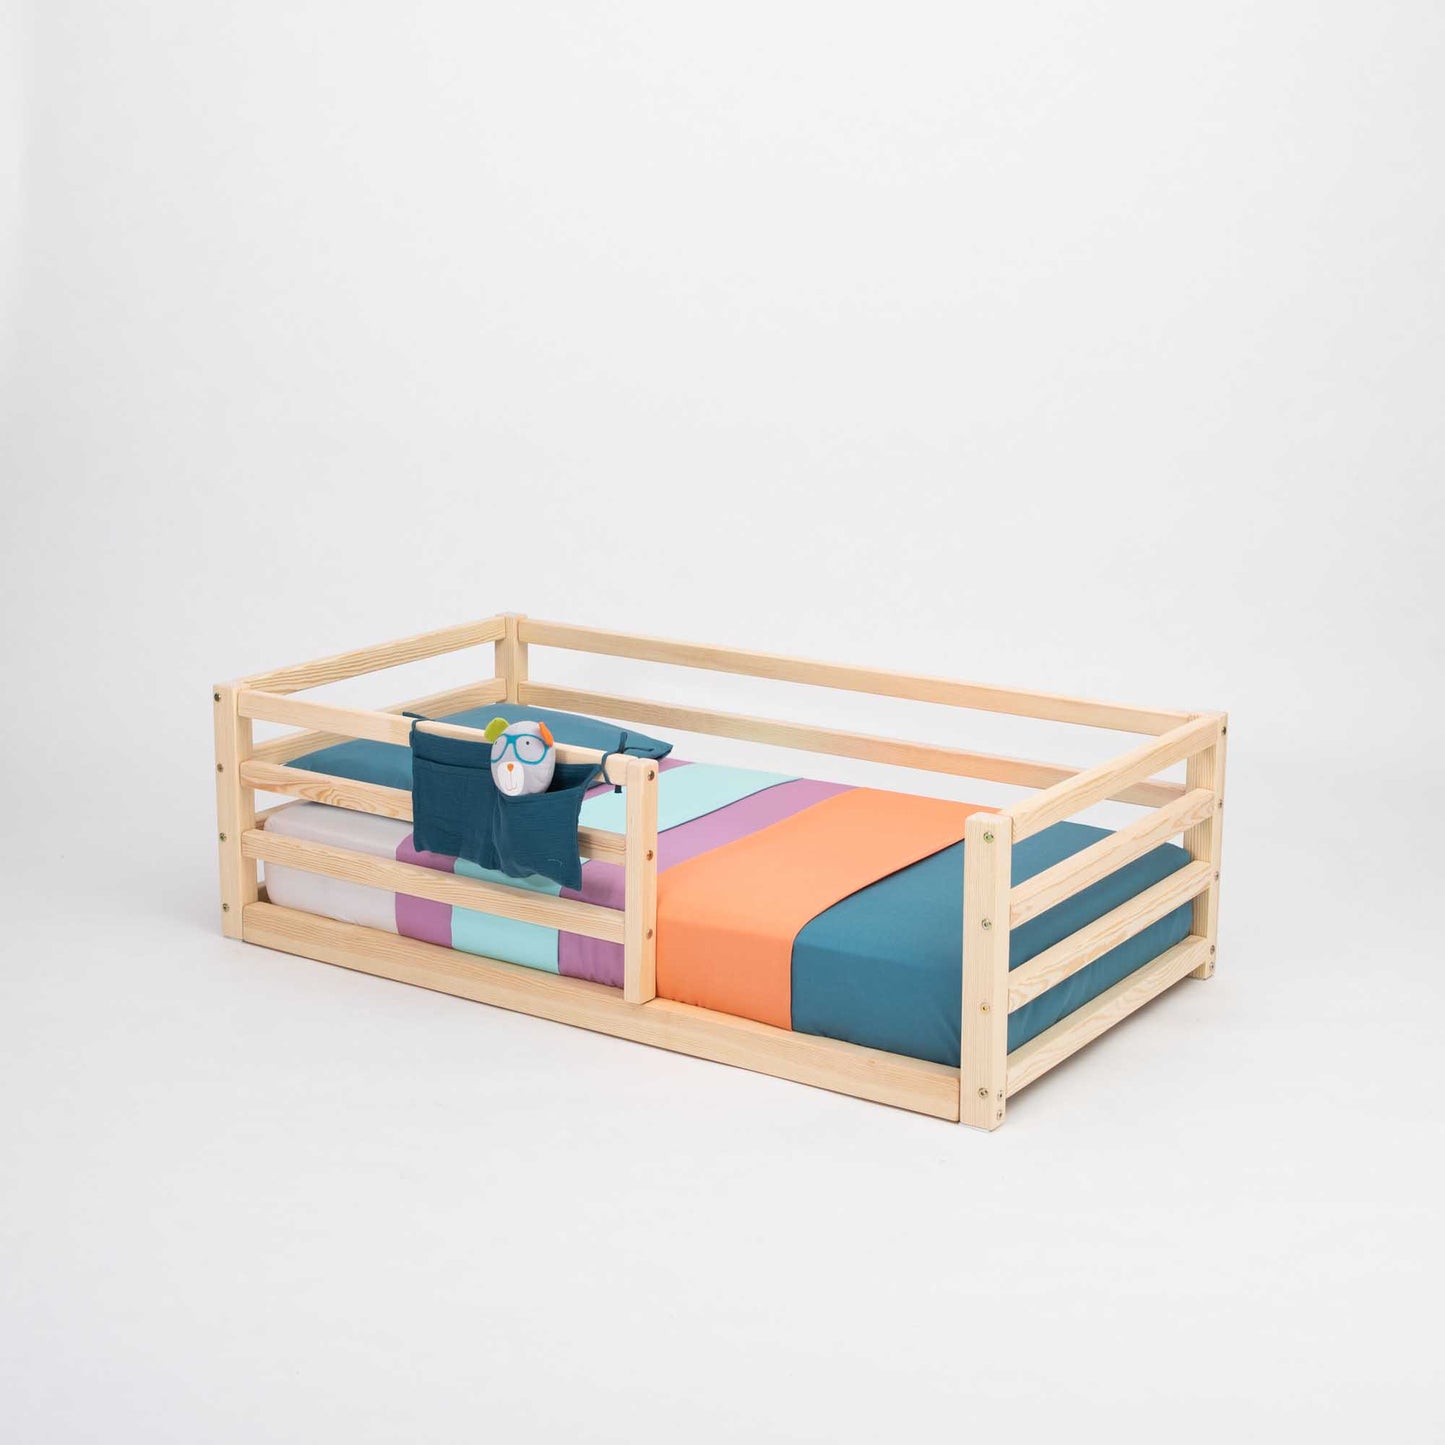 A Sweet Home From Wood 2-in-1 transformable kids' bed with a horizontal rail fence and a colorful striped sheet.